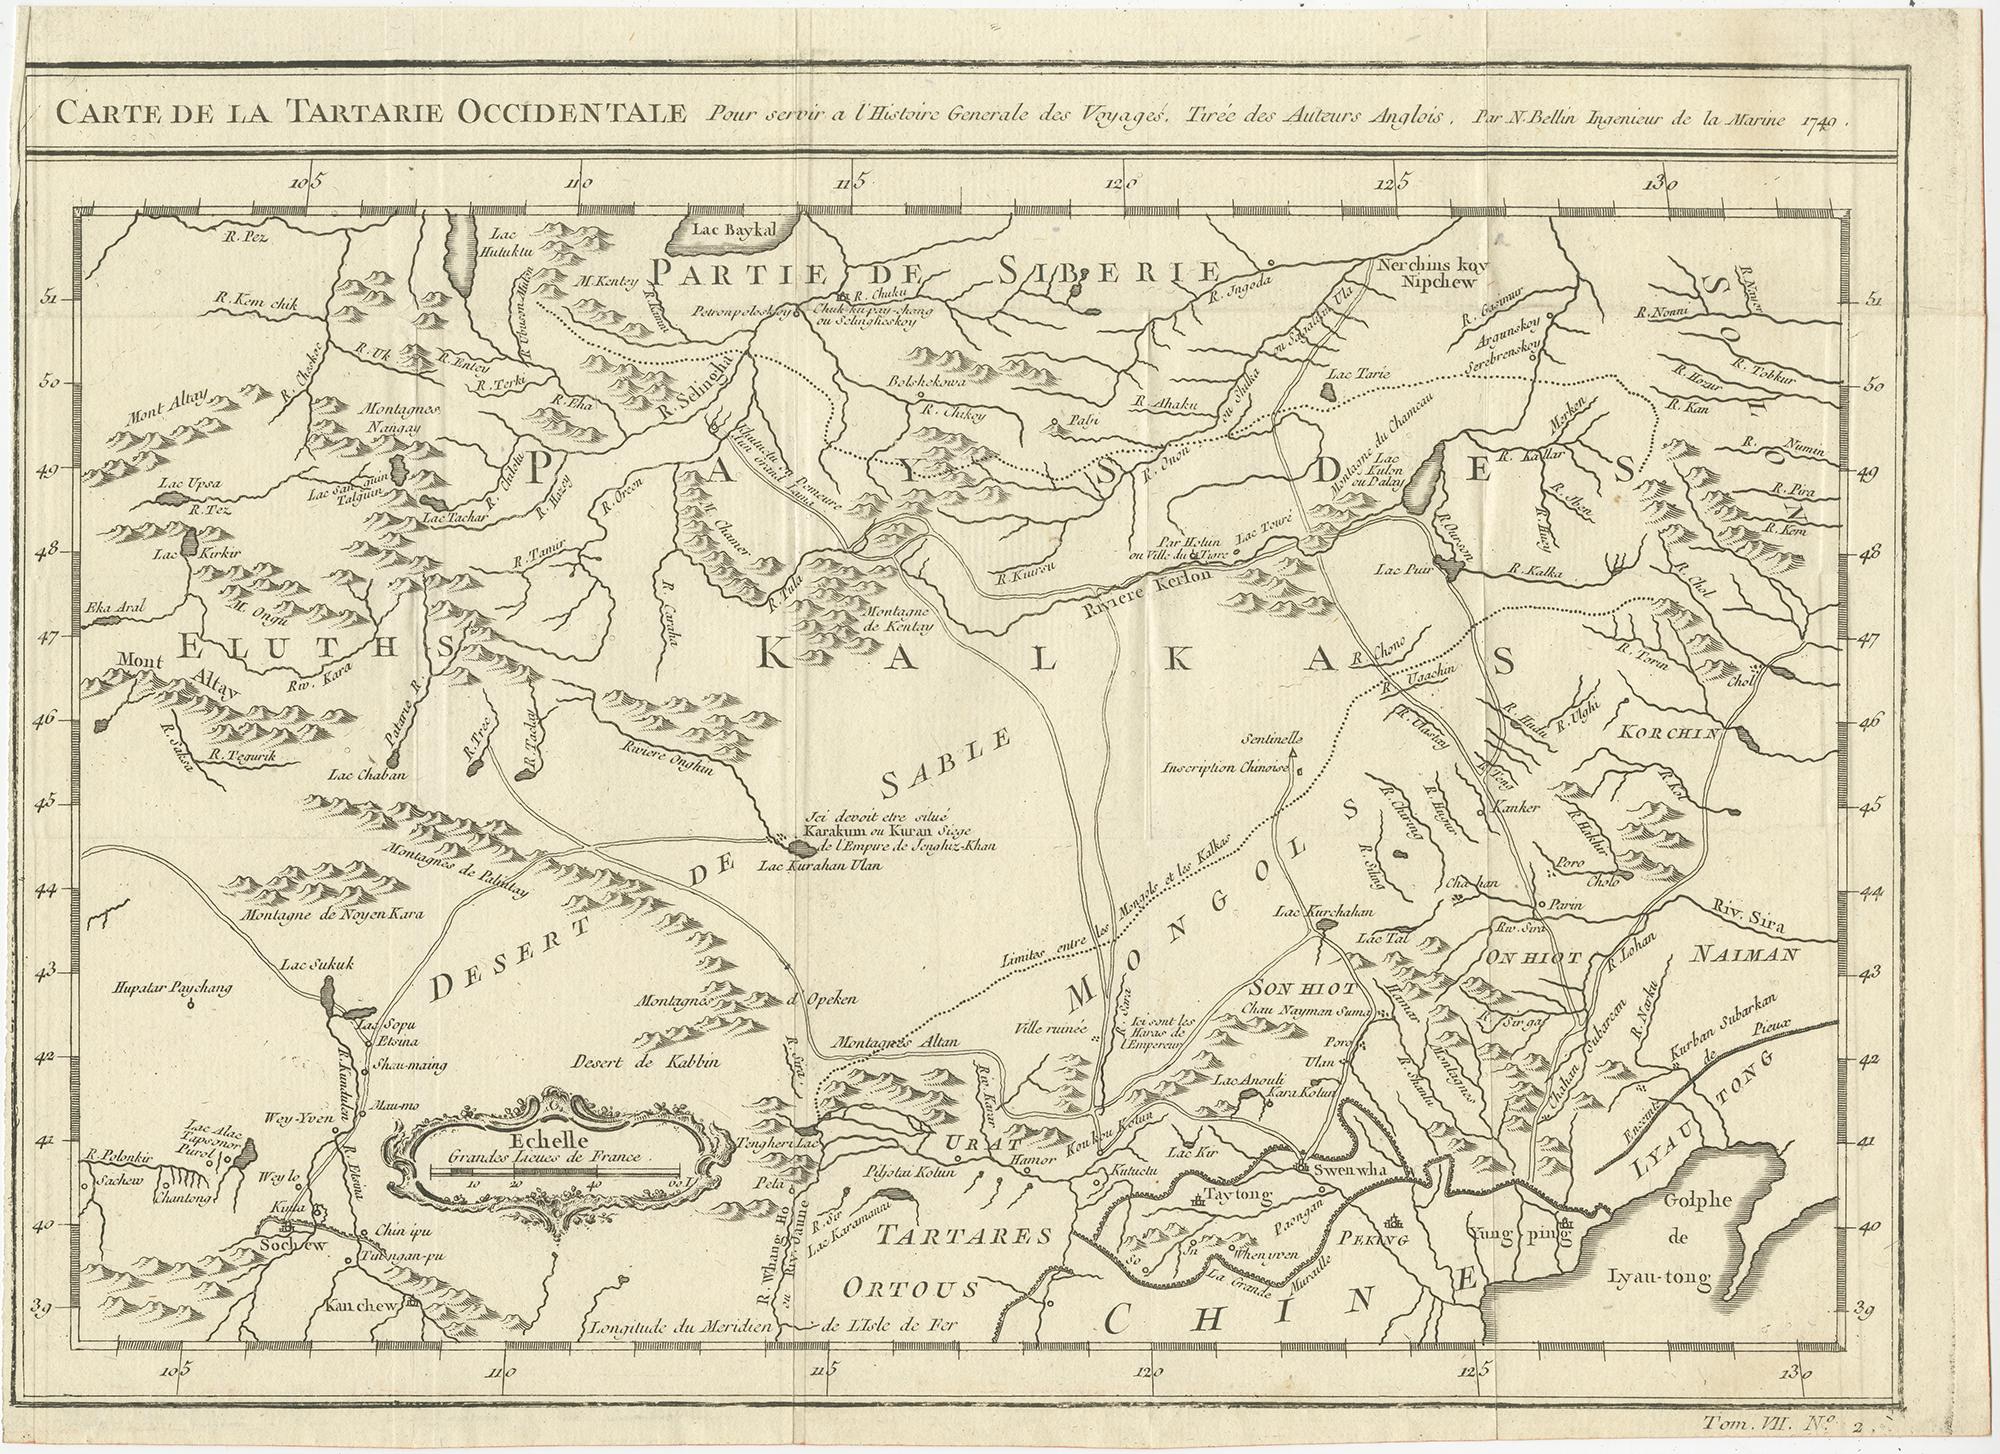 Antique map titled 'Carte de la Tartarie Occidentale'. This map covers western Tartary with a focus on the region of present-day Mongolia. This map includes information from Kyrkov's important surveys of this remote region in addition to Jesuit and